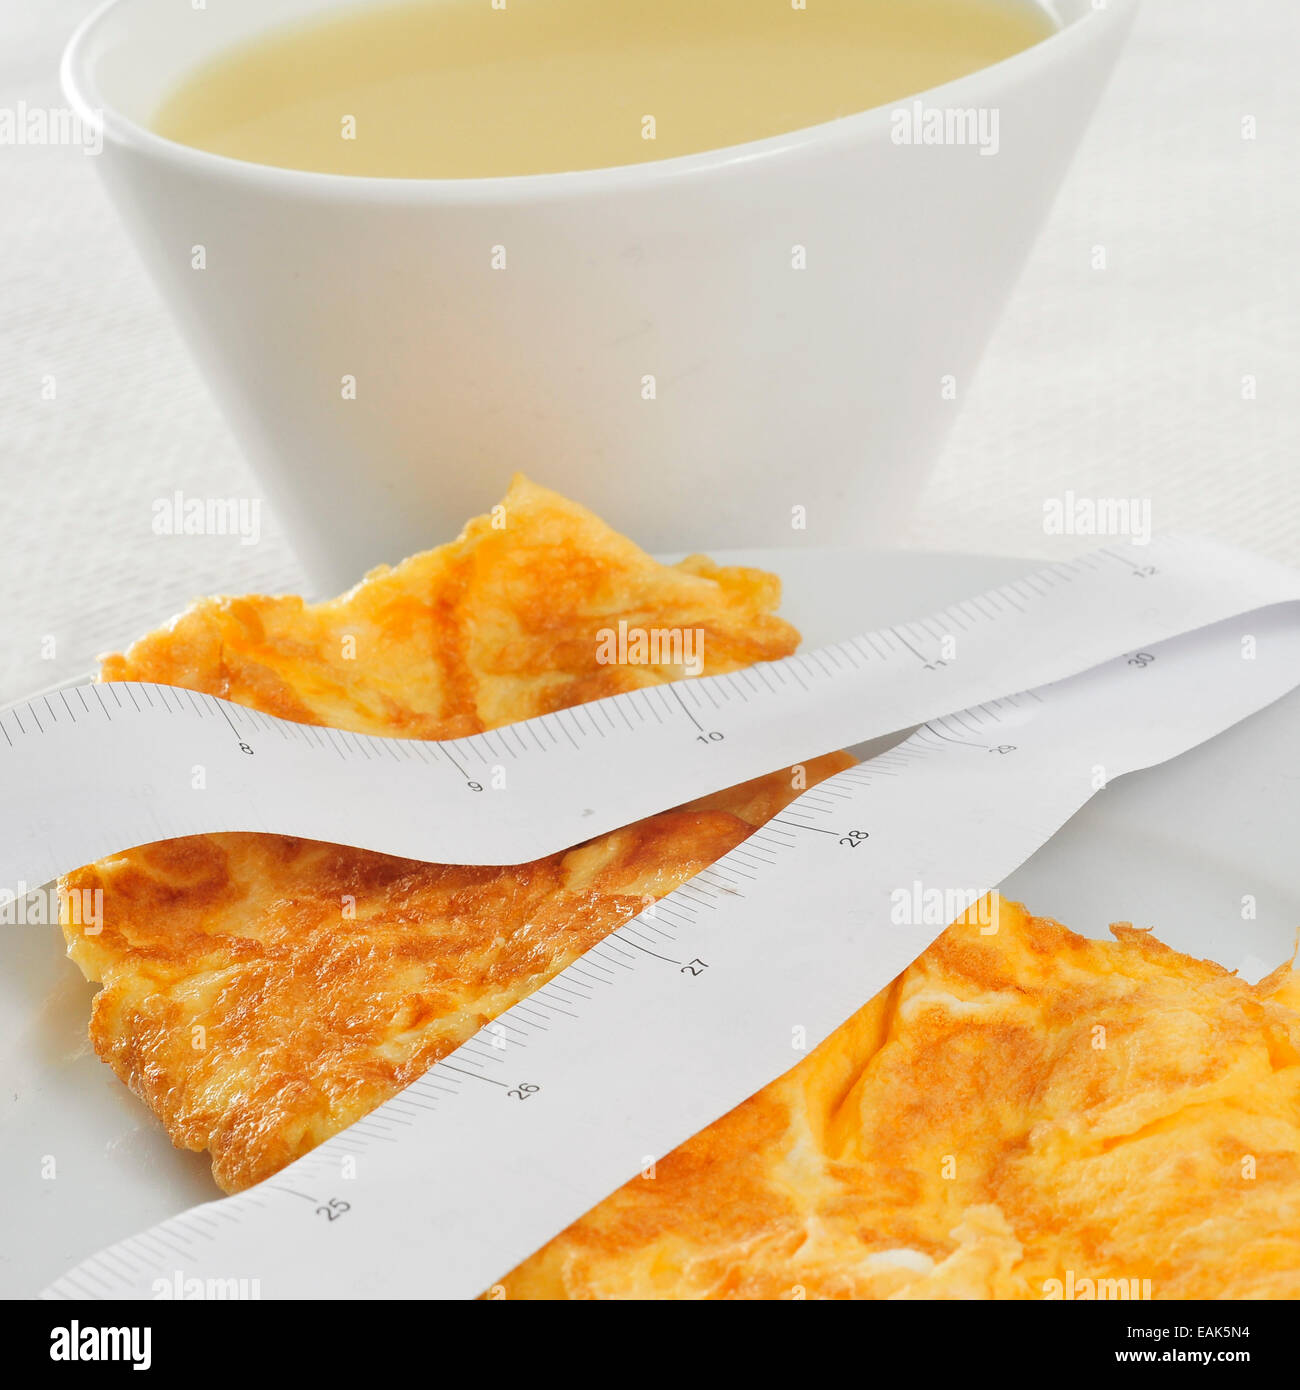 a bowl with consomme and a plate with a french omelette and a measuring tape, symbolizing the dieting concept Stock Photo